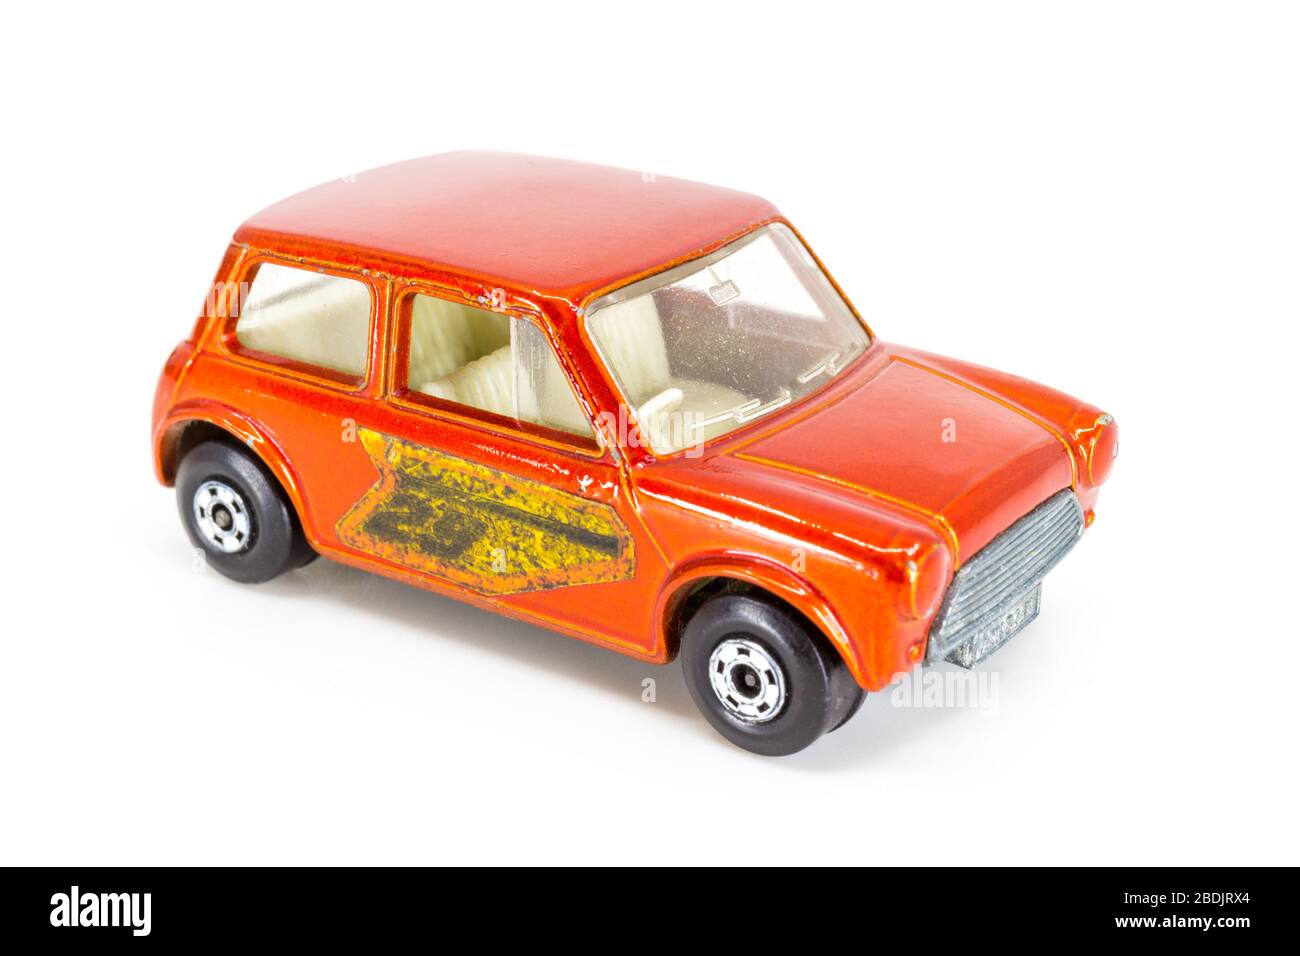 Lesney Products Matchbox model toy car 1-75 series no.29 Racing Mini Stock Photo